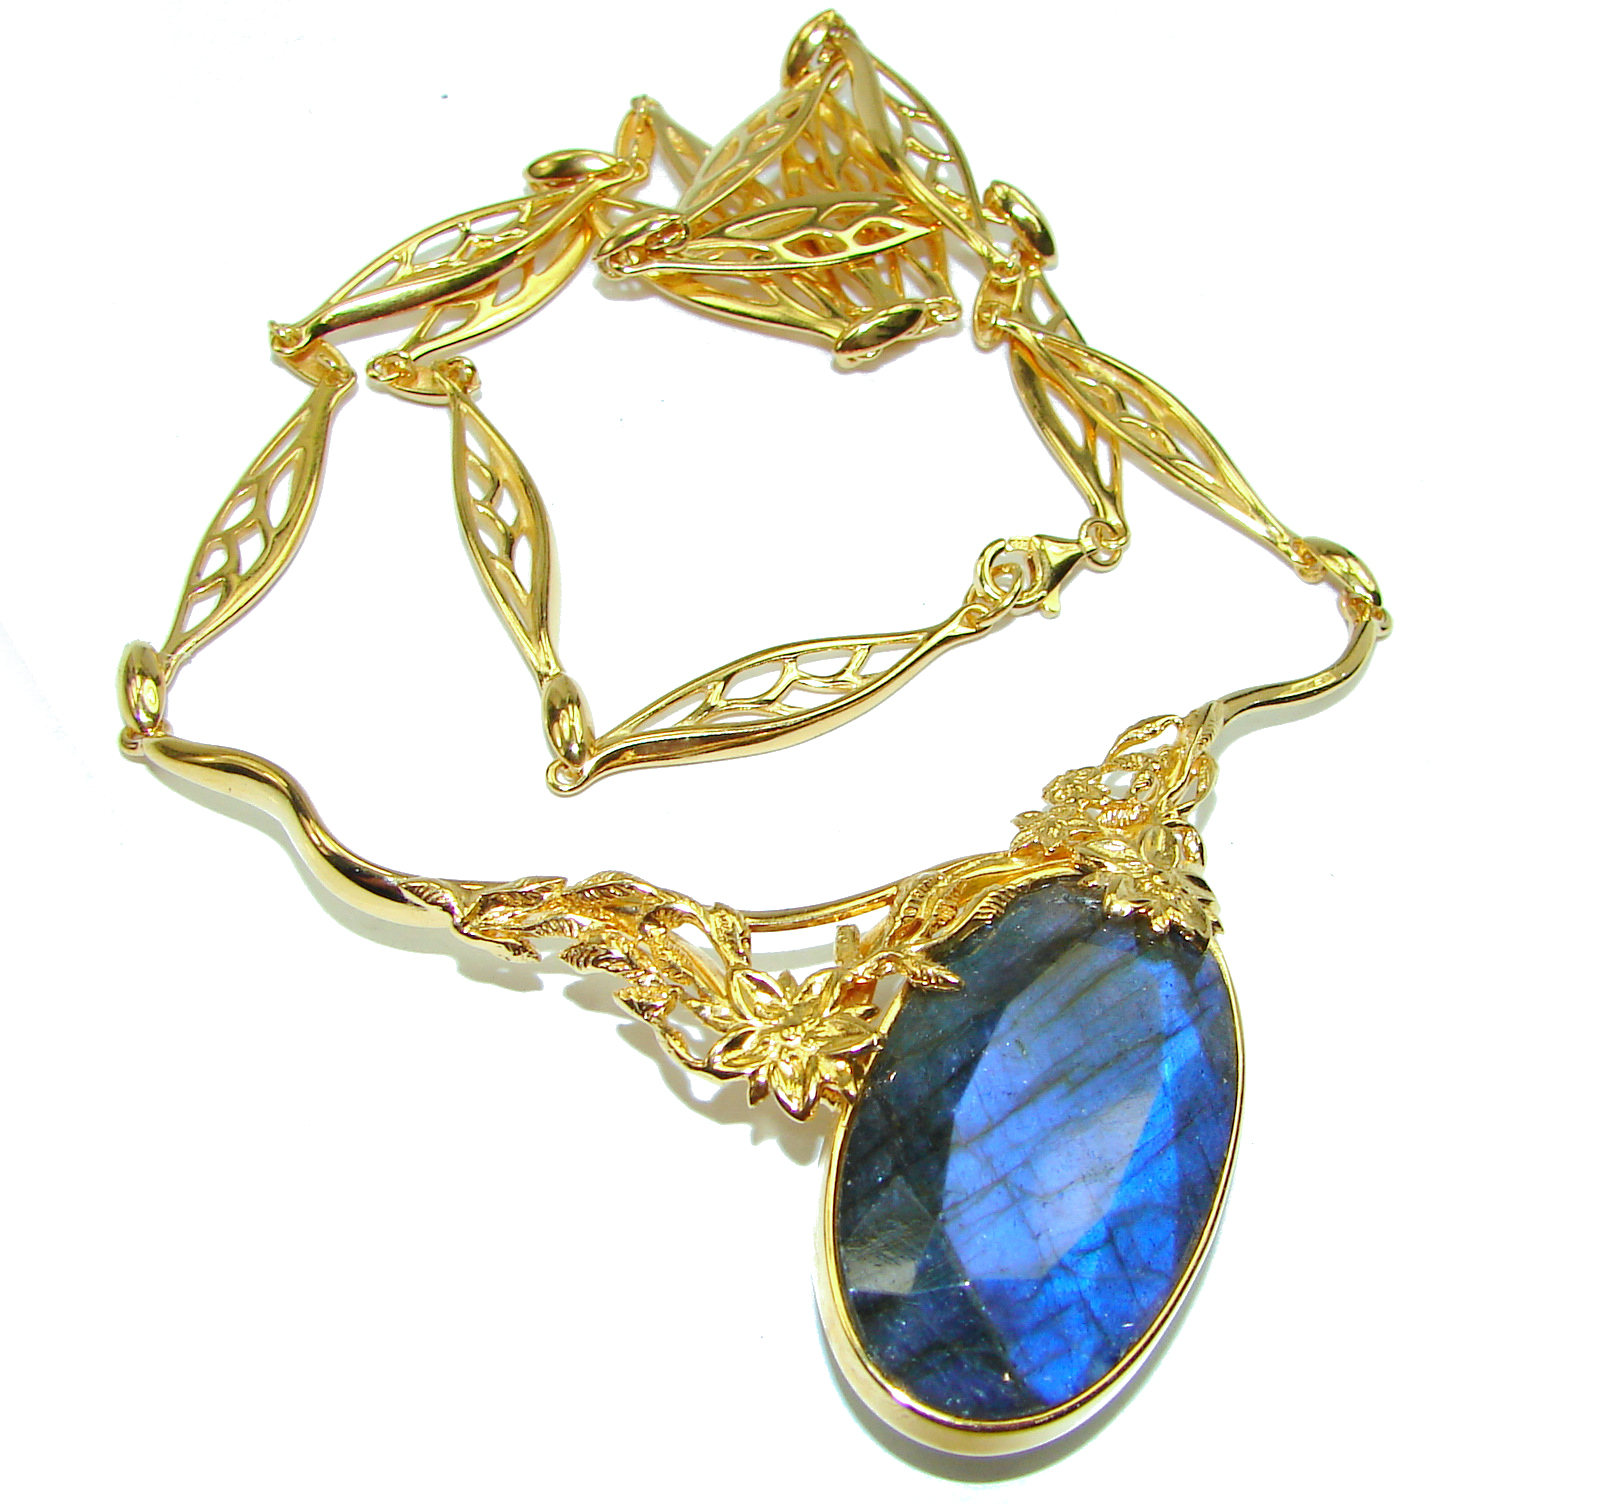 Luxury Design 44.5 ct faceted Labradorite 18K Gold over .925 Sterling Silver entirely handcrafted necklace